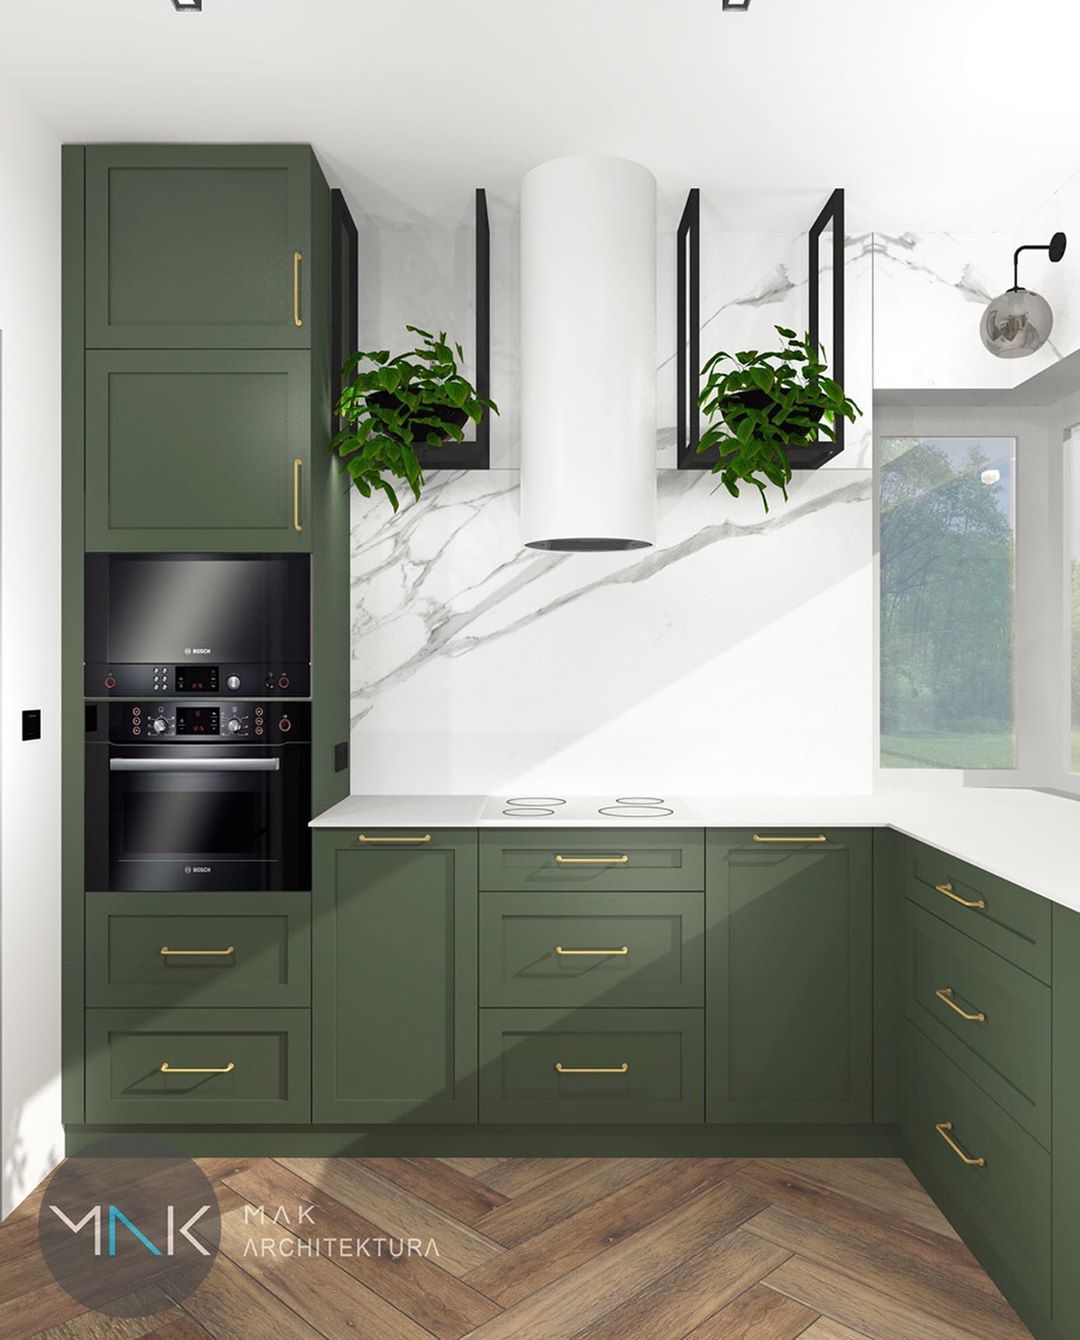 Color inspiration - green kitchen cabinets from Mak Architecture